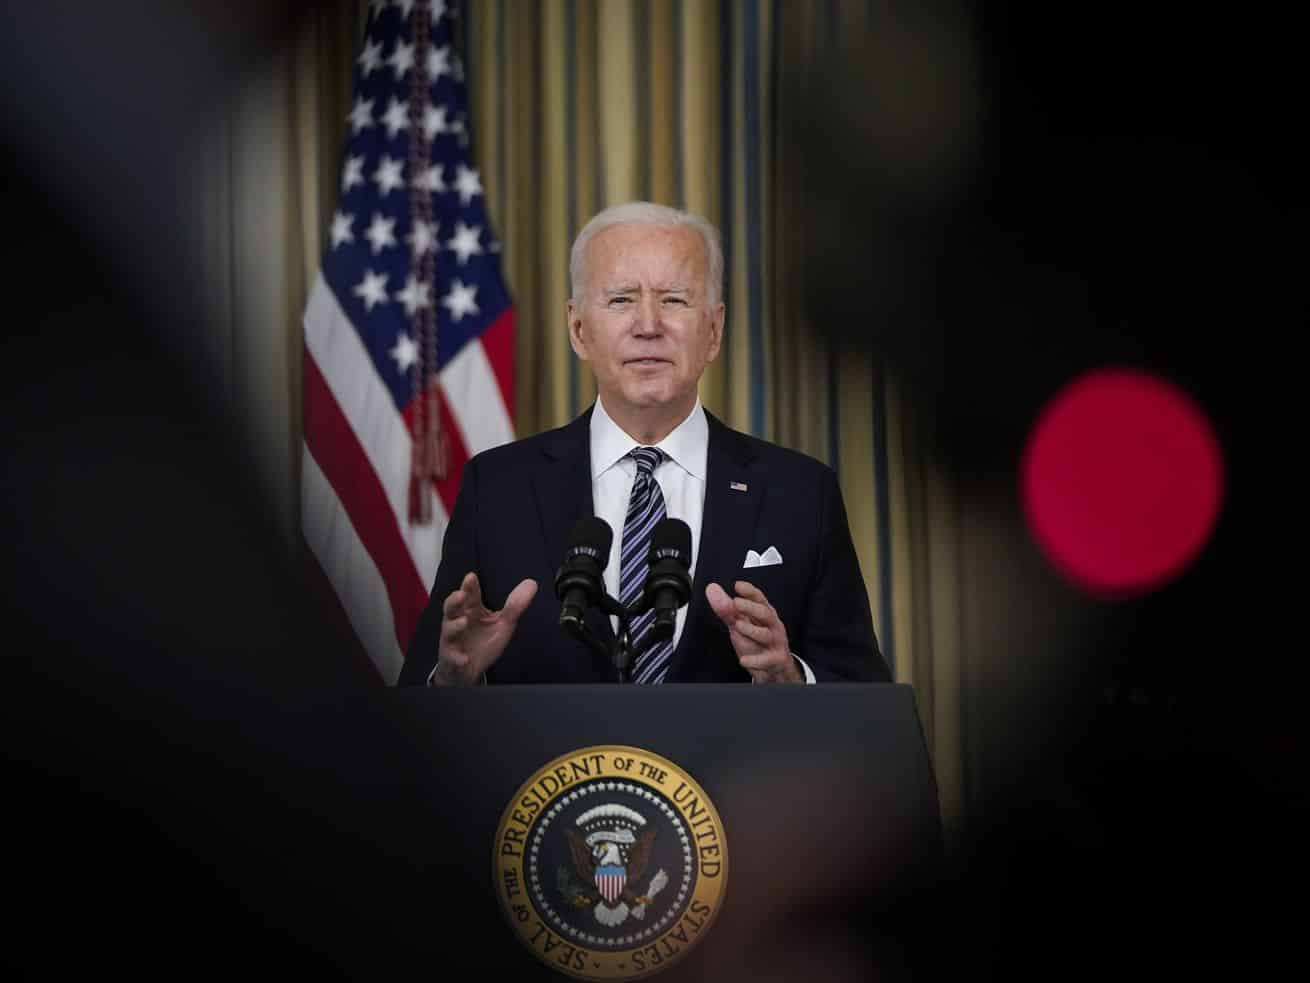 Biden vows Putin “will pay a price” for 2020 interference